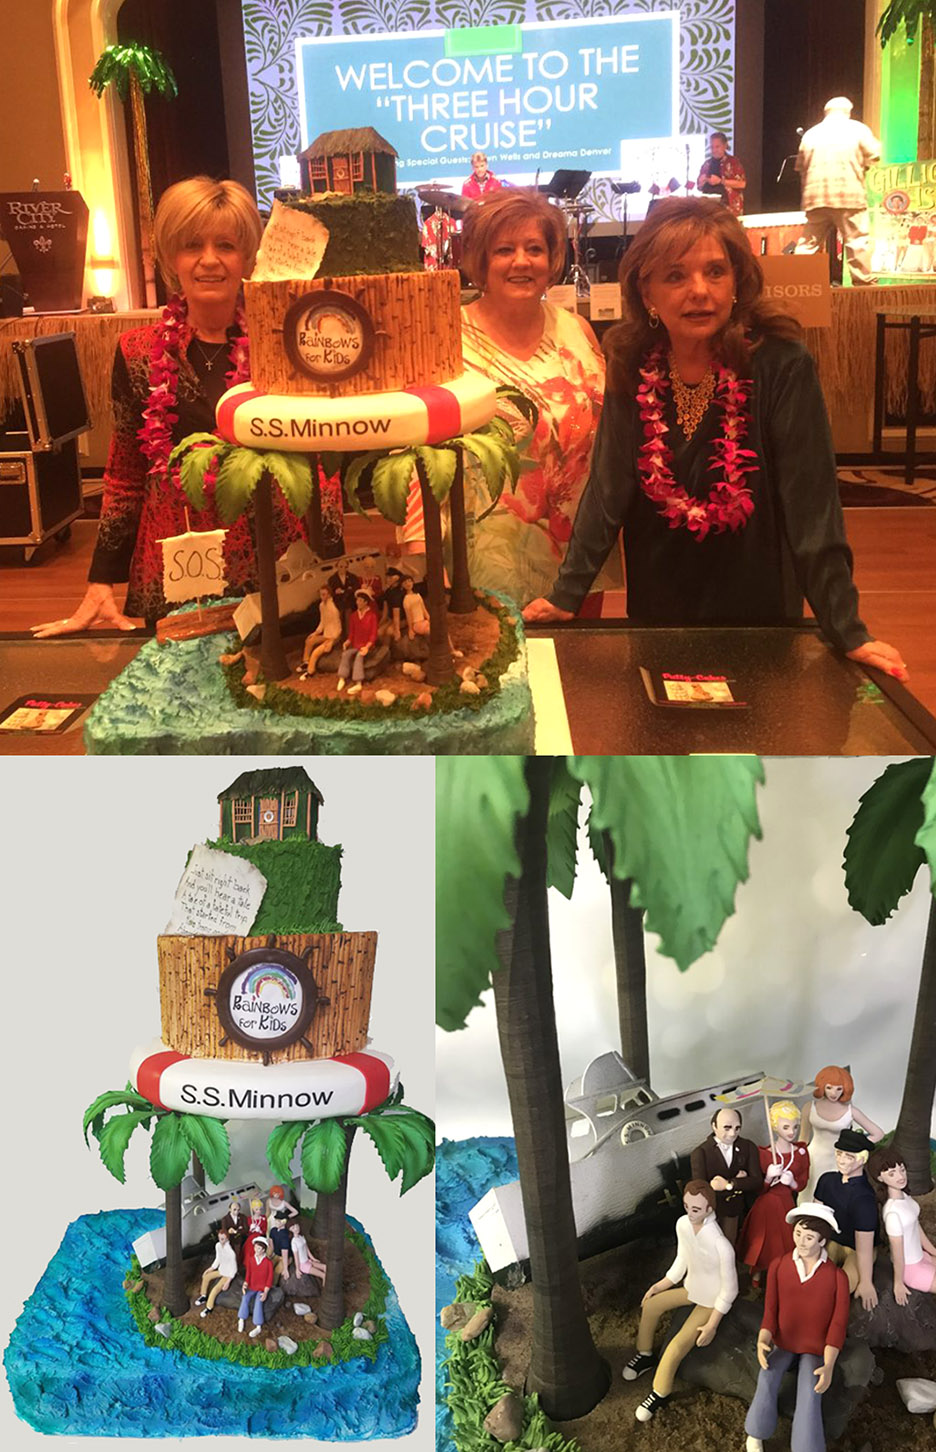 Patty Cakes and their Gilligan's Island cake